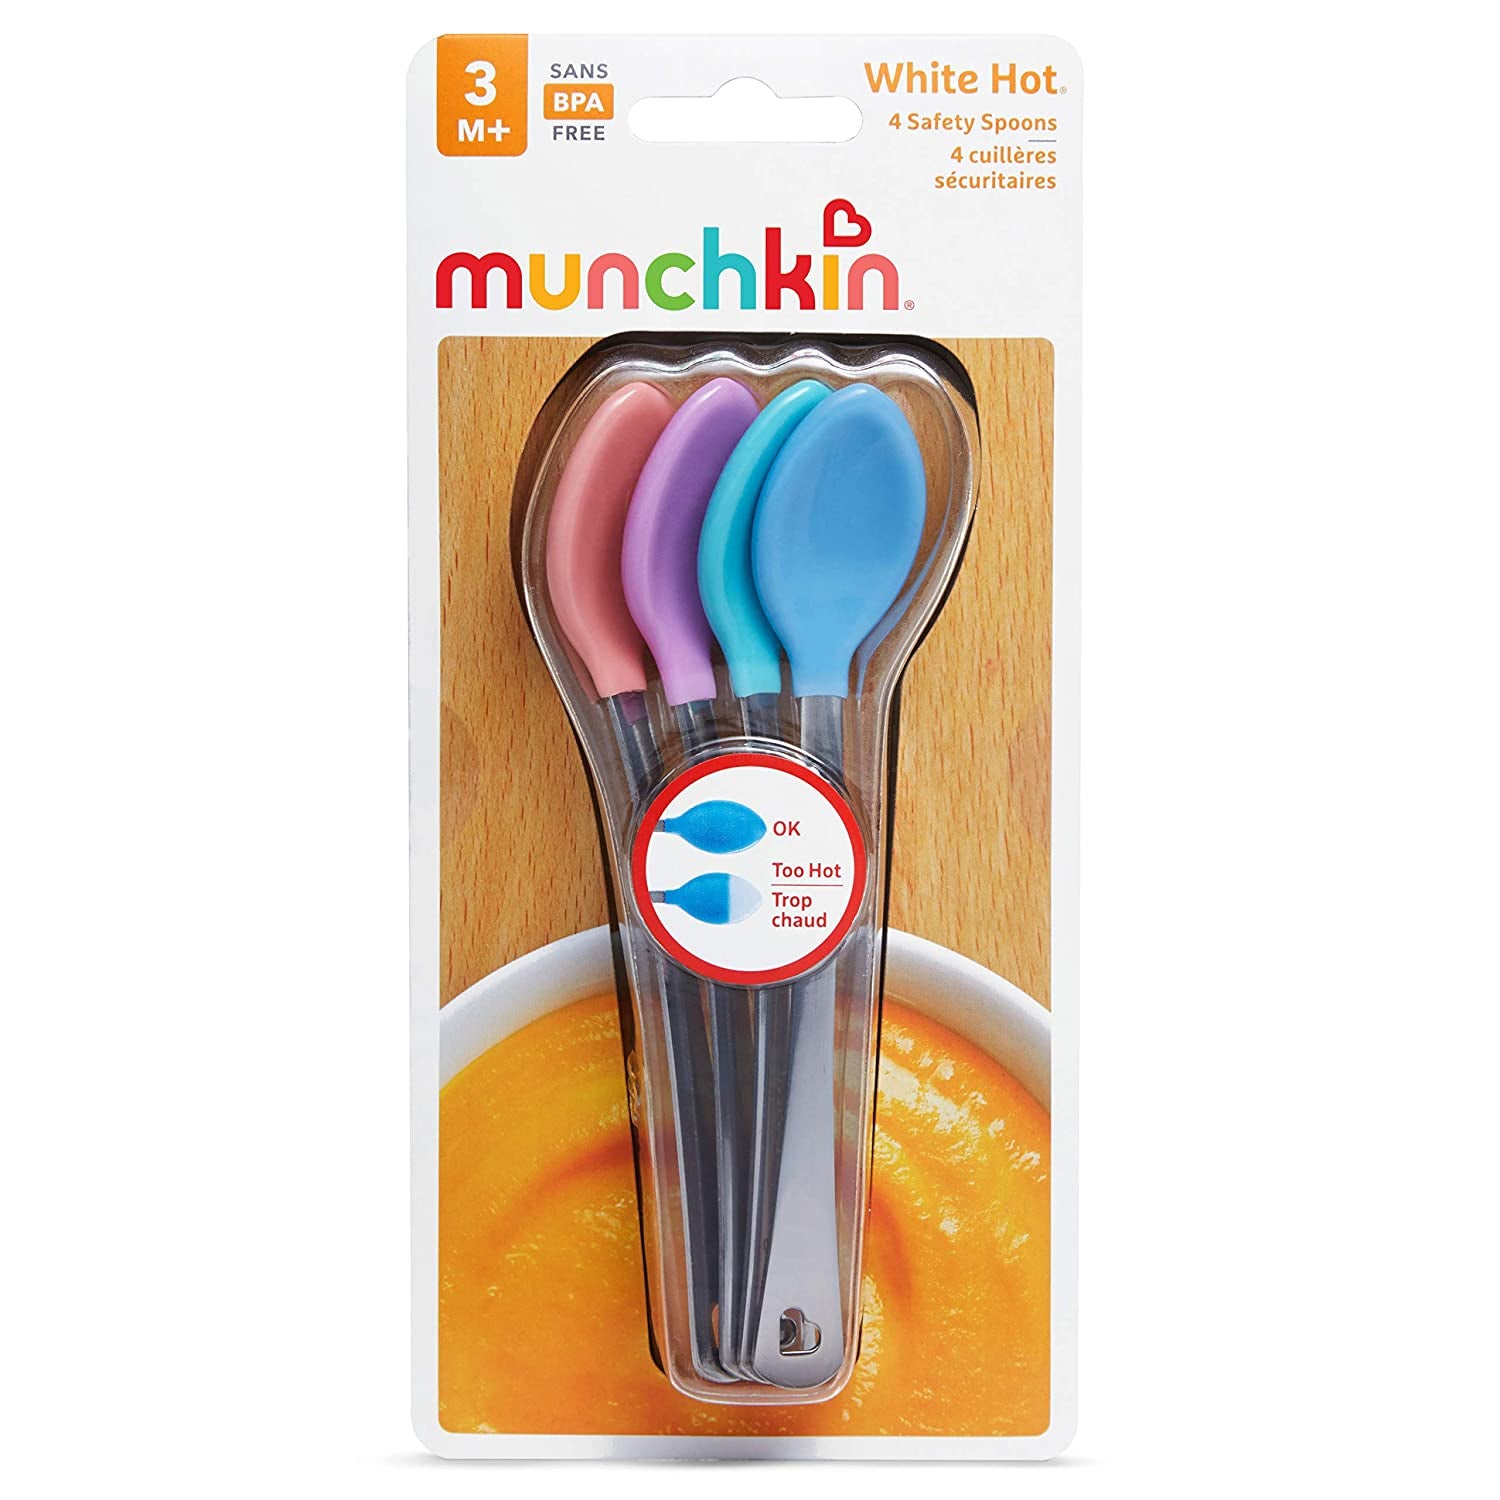 Munchkin White Hot Safety Spoons, 4 Pack